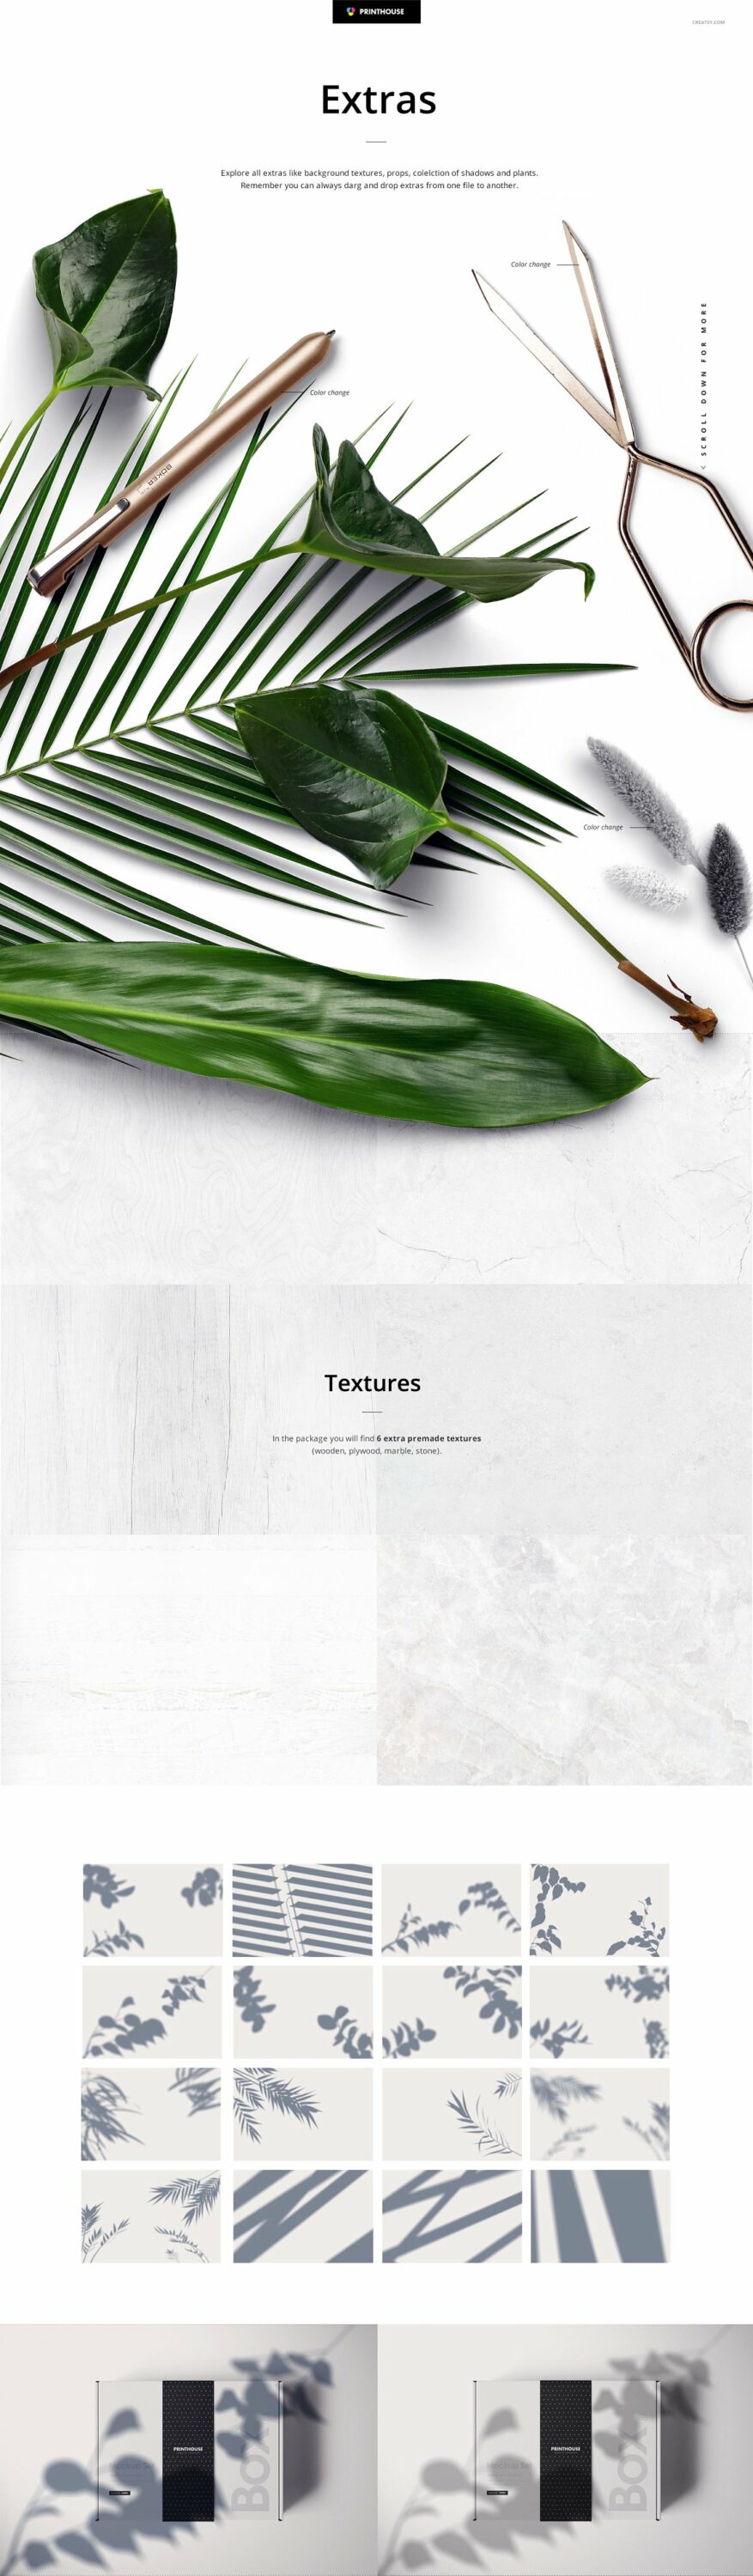 Set of images of irresistible textures for mailing box design.